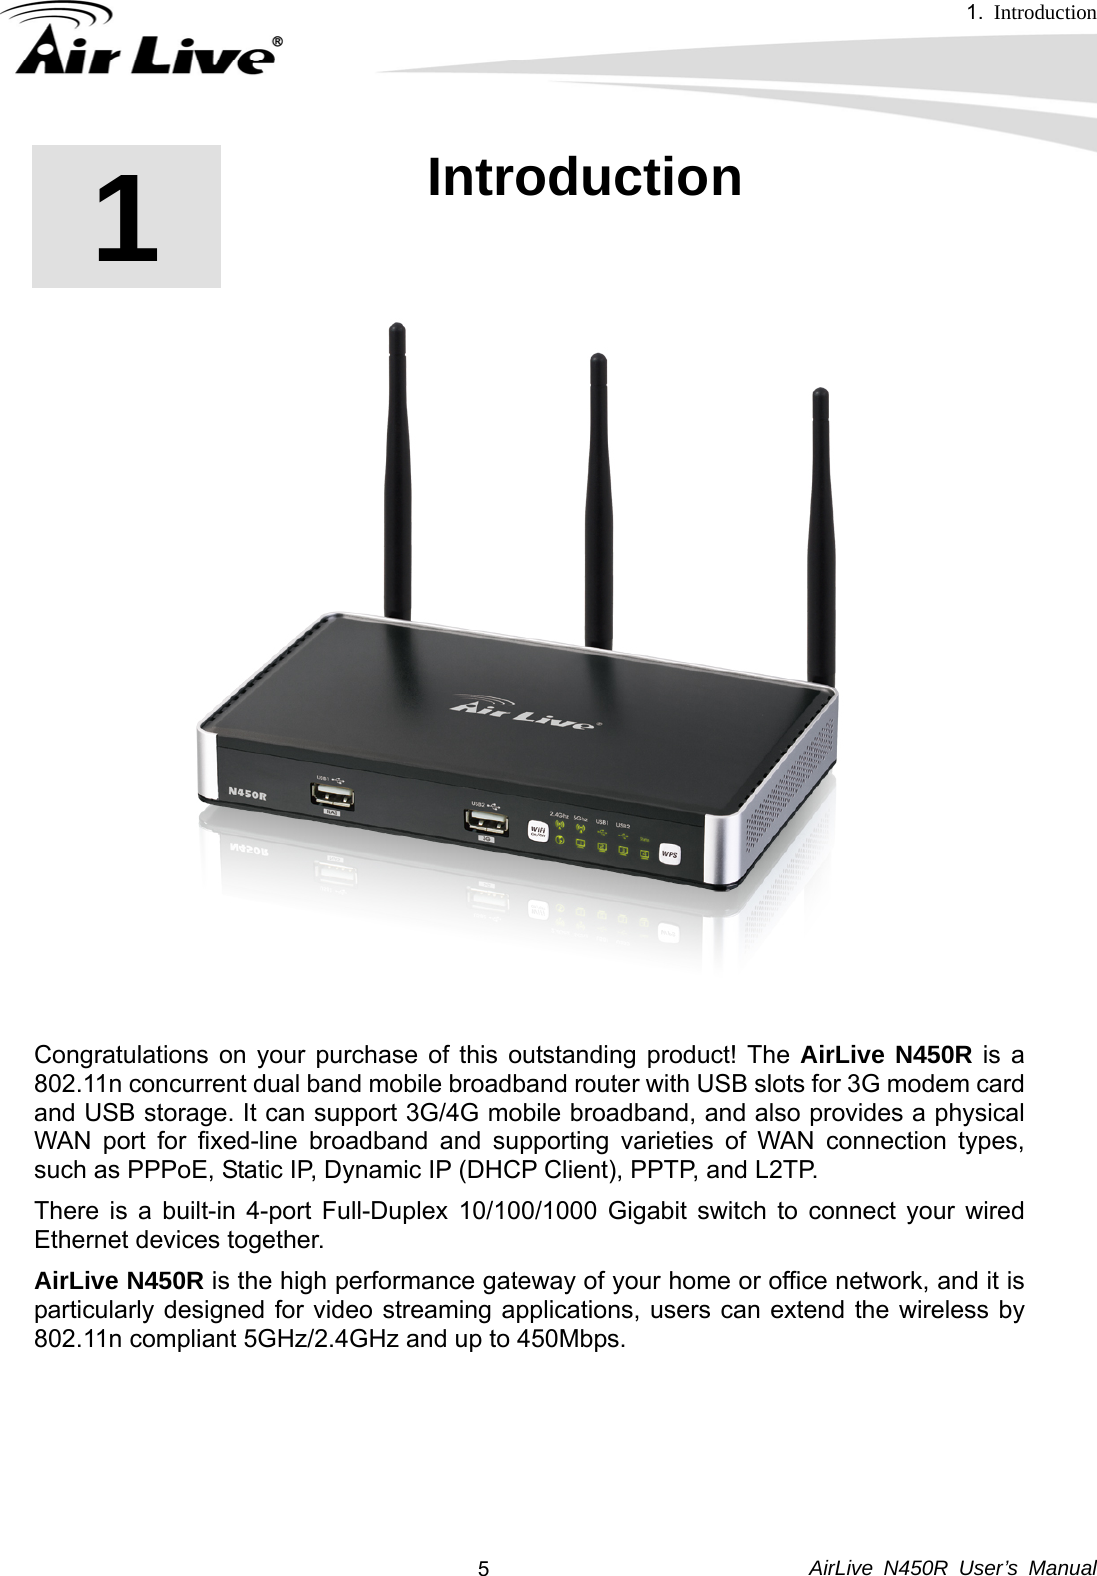 1.  Introduction     AirLive N450R User’s Manual  51  1. Introduction    Congratulations on your purchase of this outstanding product! The AirLive N450R is a 802.11n concurrent dual band mobile broadband router with USB slots for 3G modem card and USB storage. It can support 3G/4G mobile broadband, and also provides a physical WAN port for fixed-line broadband and supporting varieties of WAN connection types, such as PPPoE, Static IP, Dynamic IP (DHCP Client), PPTP, and L2TP.   There is a built-in 4-port Full-Duplex 10/100/1000 Gigabit switch to connect your wired Ethernet devices together.   AirLive N450R is the high performance gateway of your home or office network, and it is particularly designed for video streaming applications, users can extend the wireless by 802.11n compliant 5GHz/2.4GHz and up to 450Mbps.        